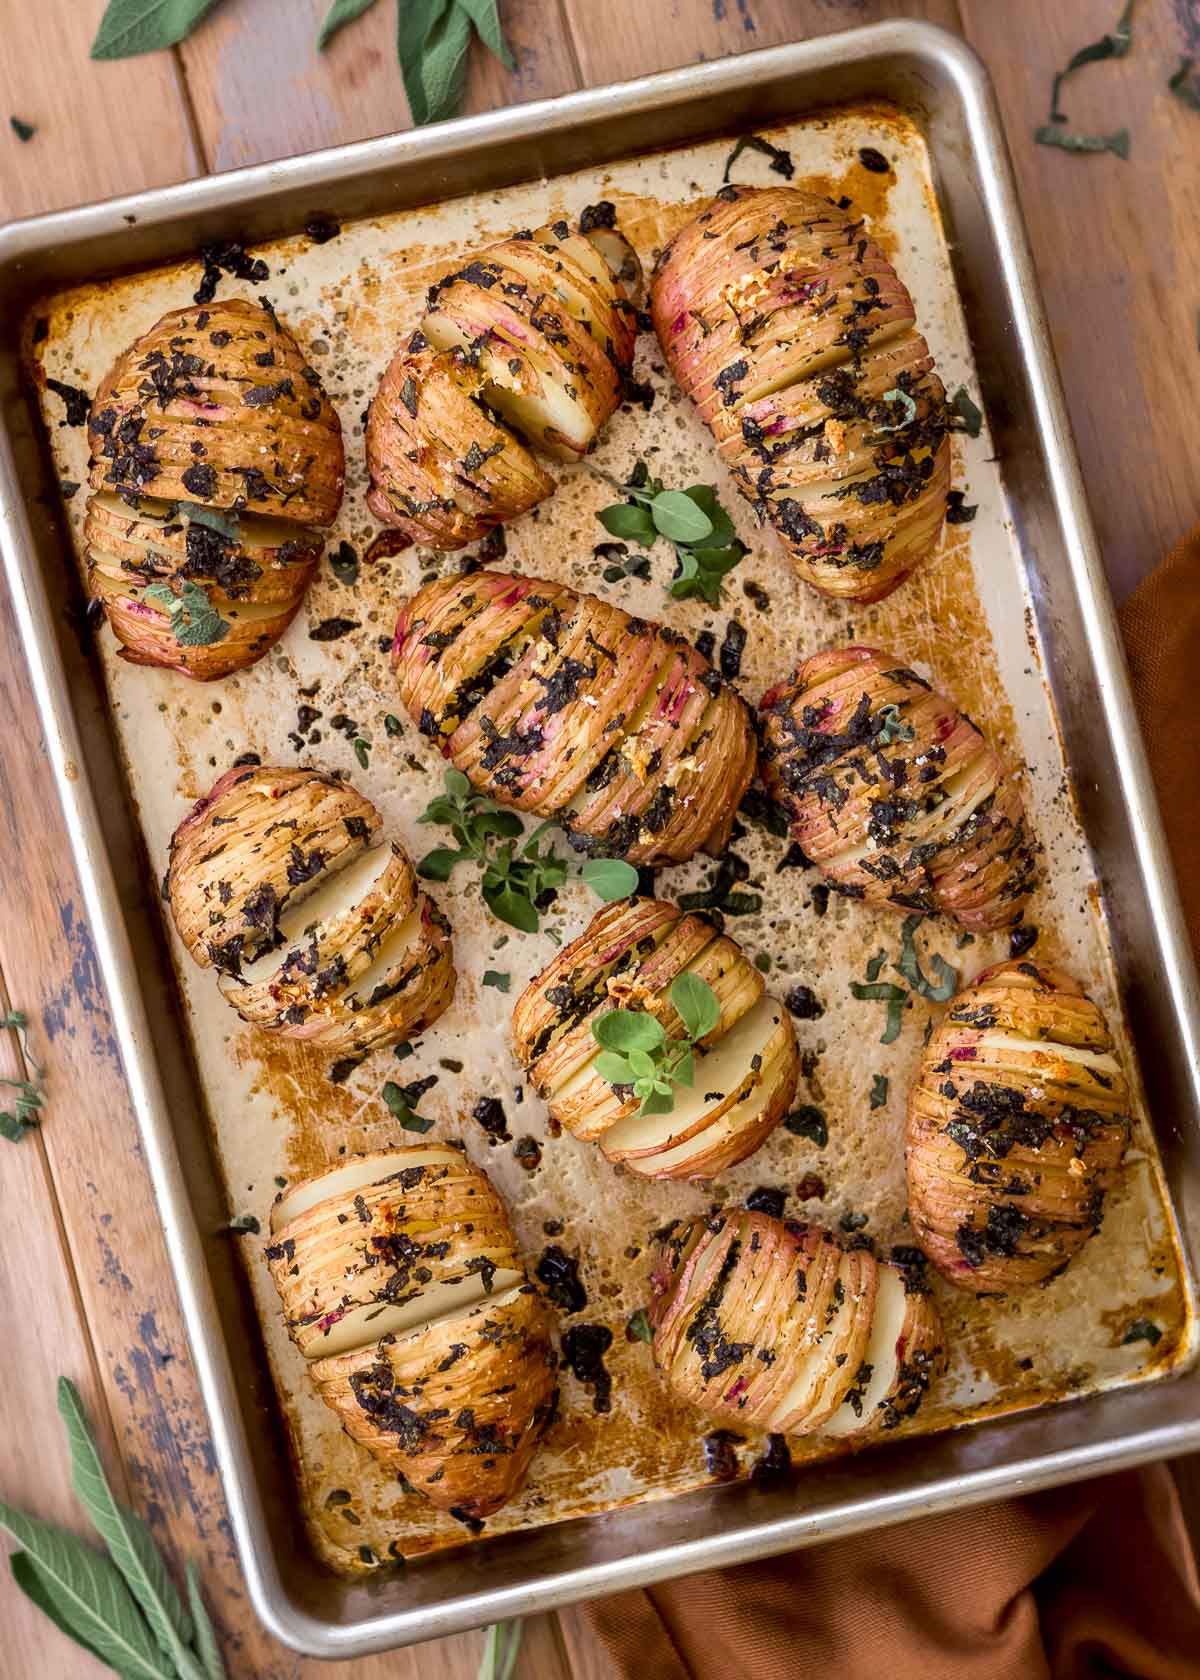 Garlic hasselback potatoes on a silver baking sheet, decorated with fresh herbs.